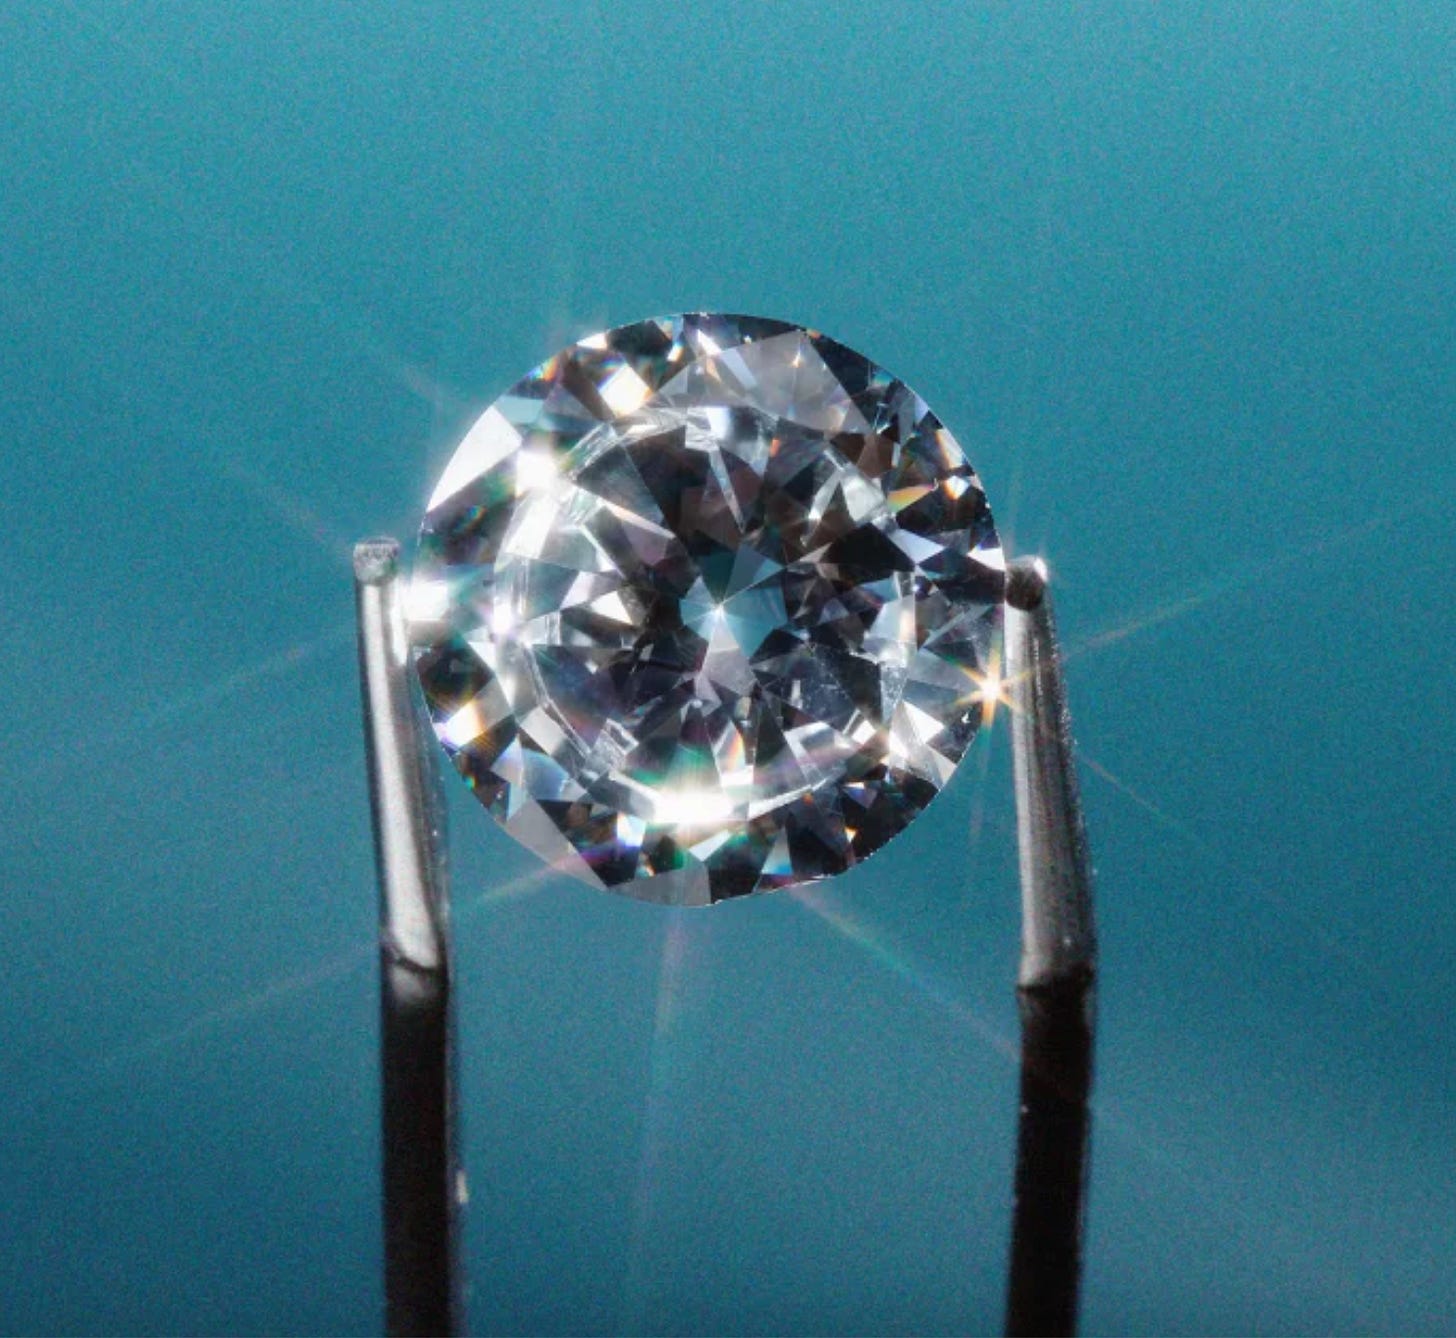 A photo of a super sparkly diamond being held up with tweezers.